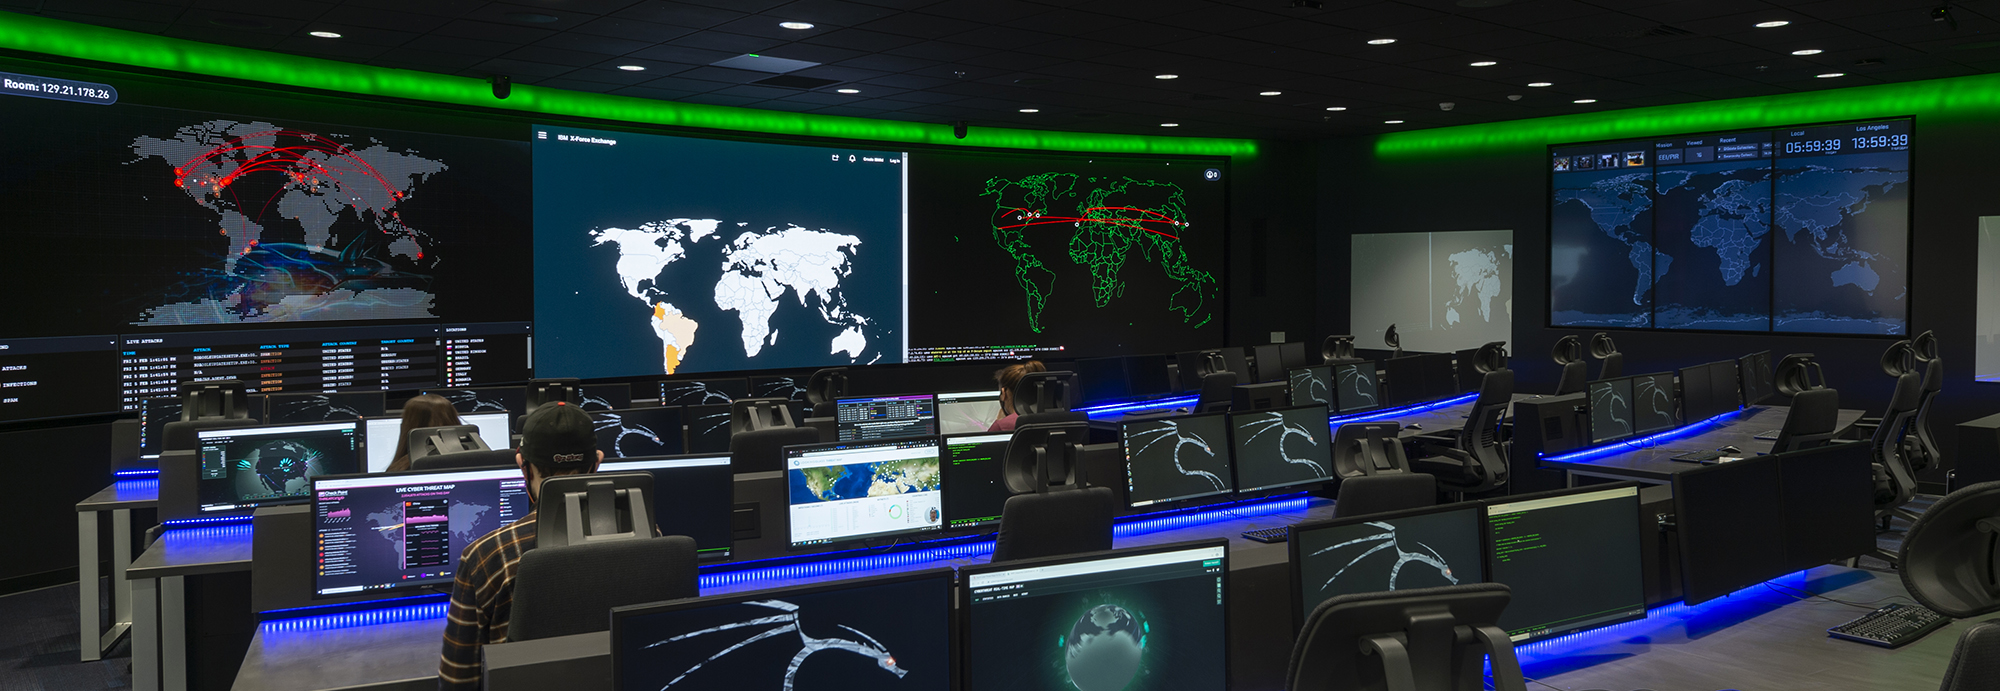 Photo of cybersecurity room with monitoring equipment and displays